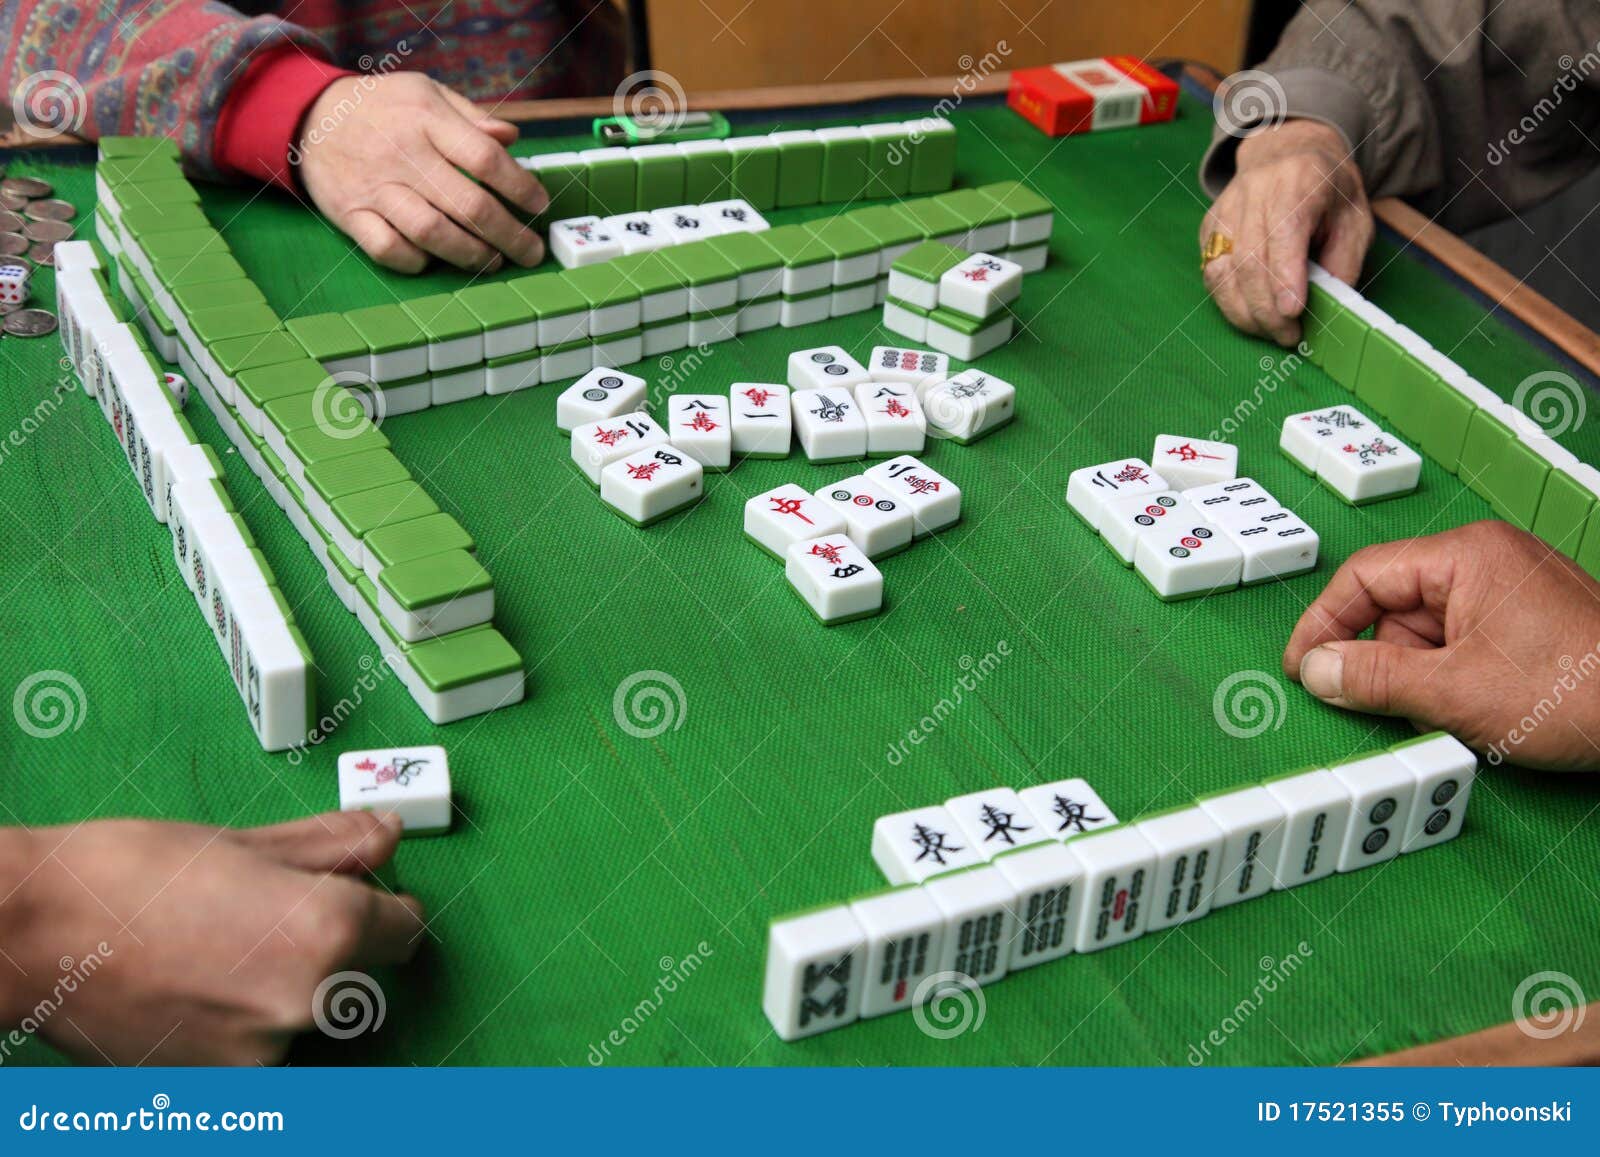 Mahjong Solitaire stock image. Image of chinese, asia - 100025657